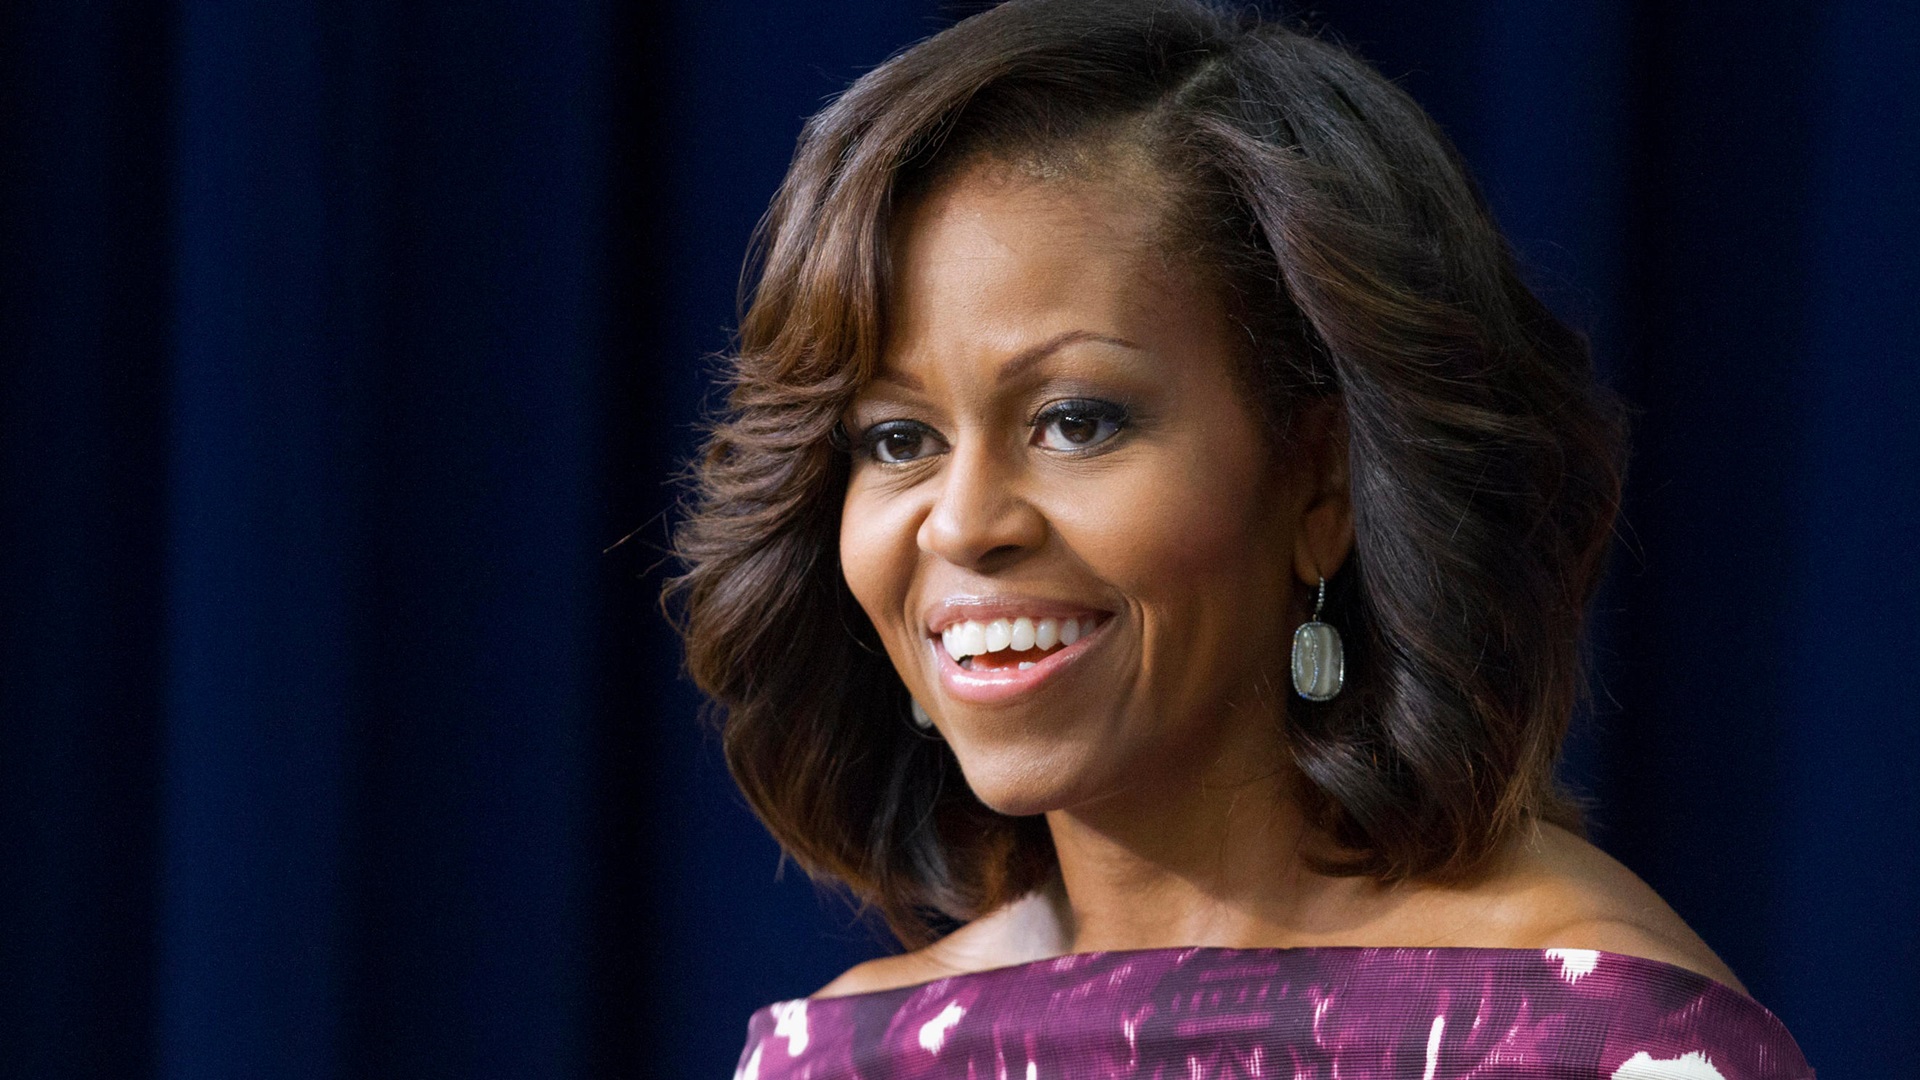 Michelle Obama Smiling Photos HD Wallpaper Image Pictures